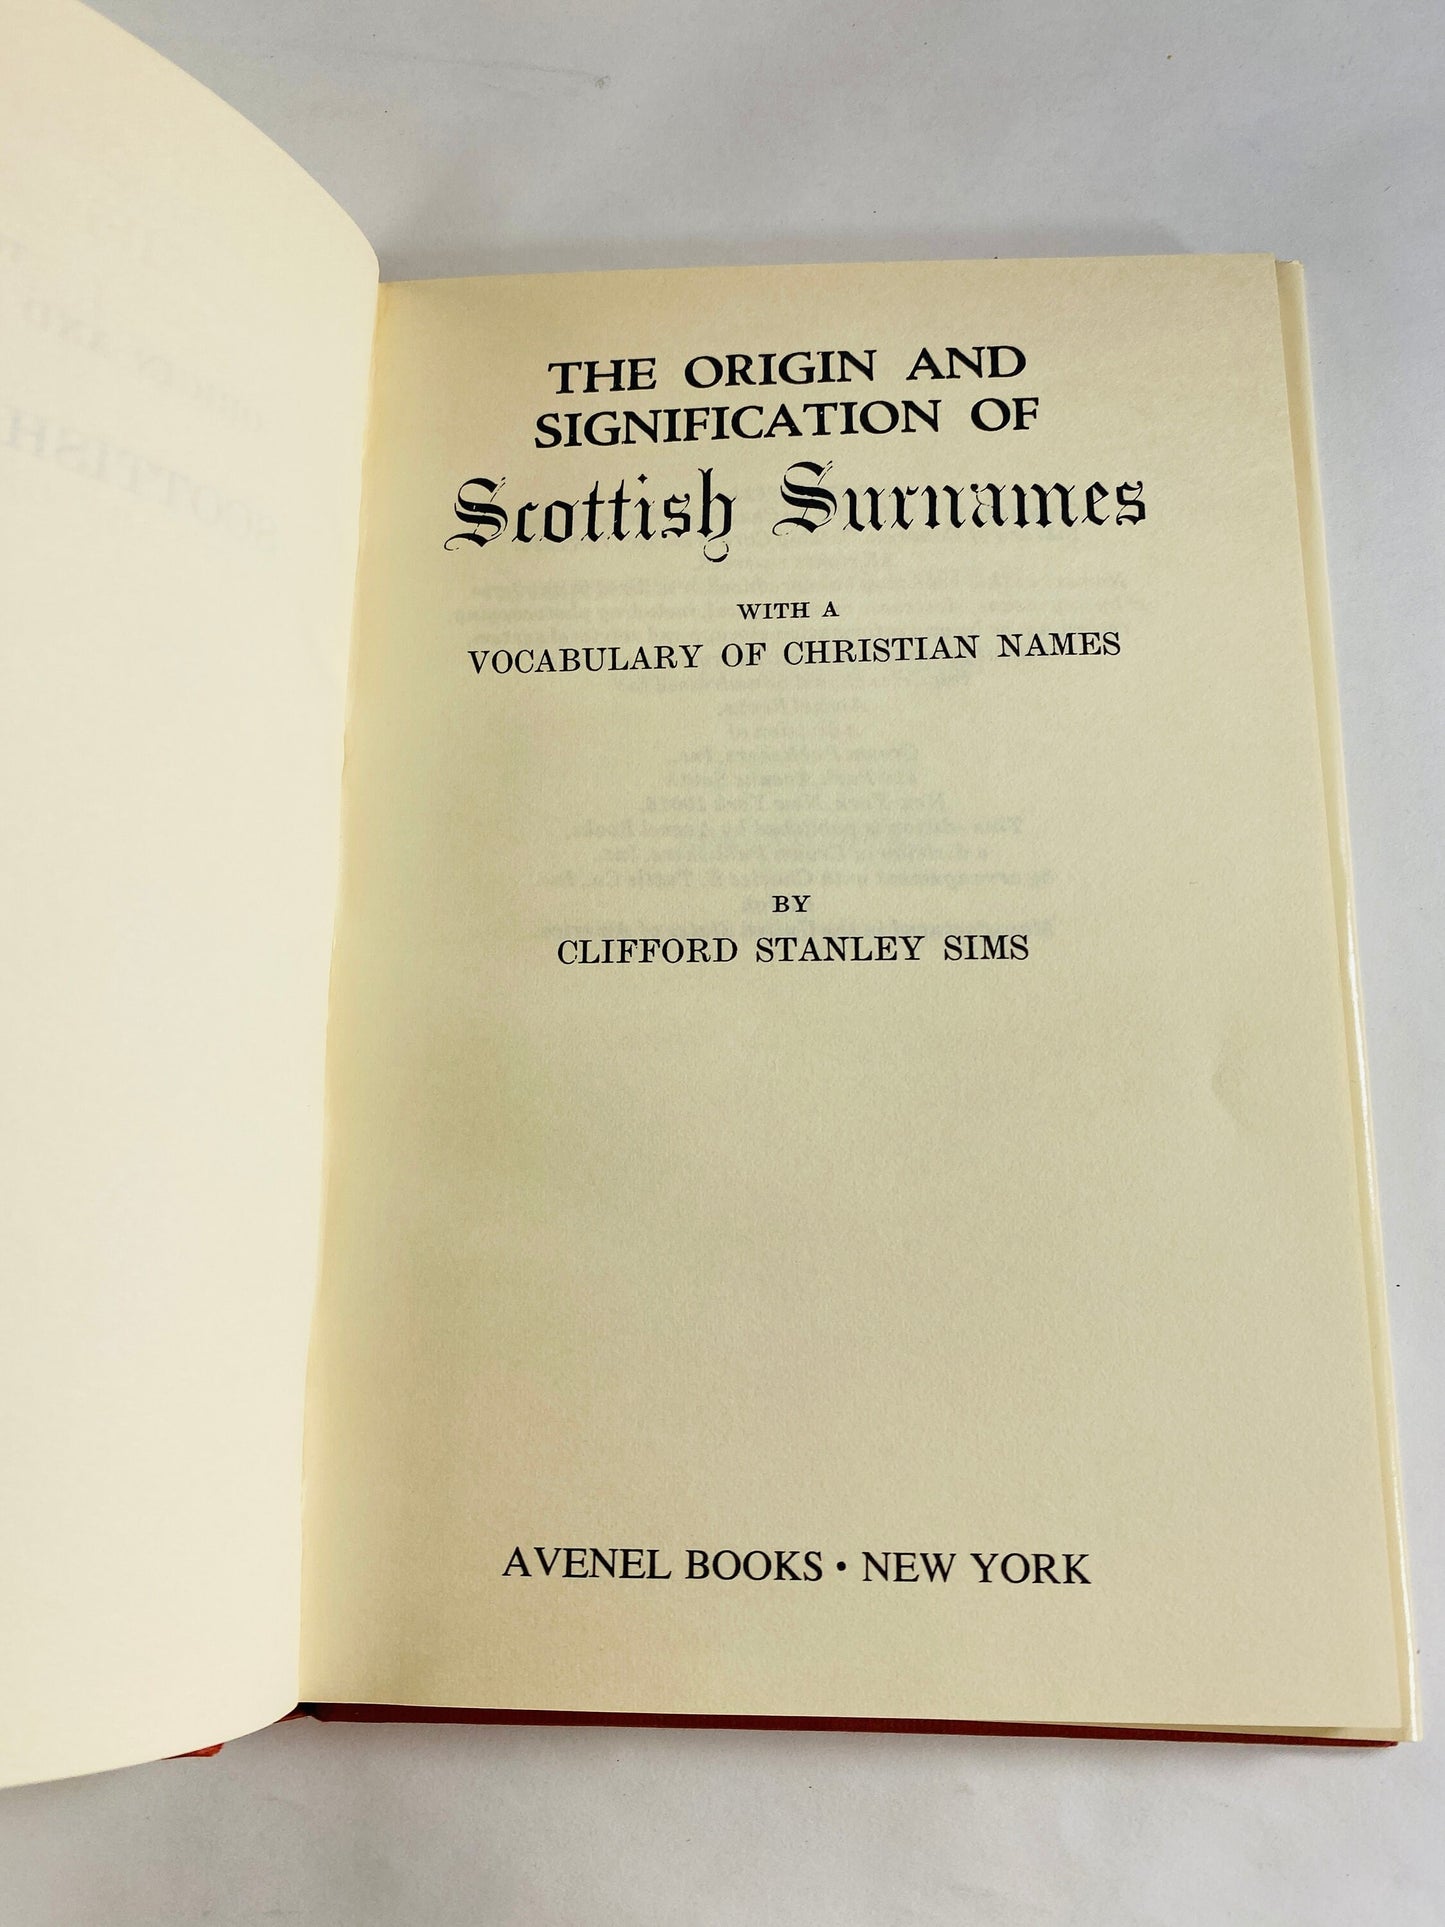 Scottish Surnames Origin and Signification vintage book by Clifford Sims Genealogy gift Father's Day Scotland home decor family lineage